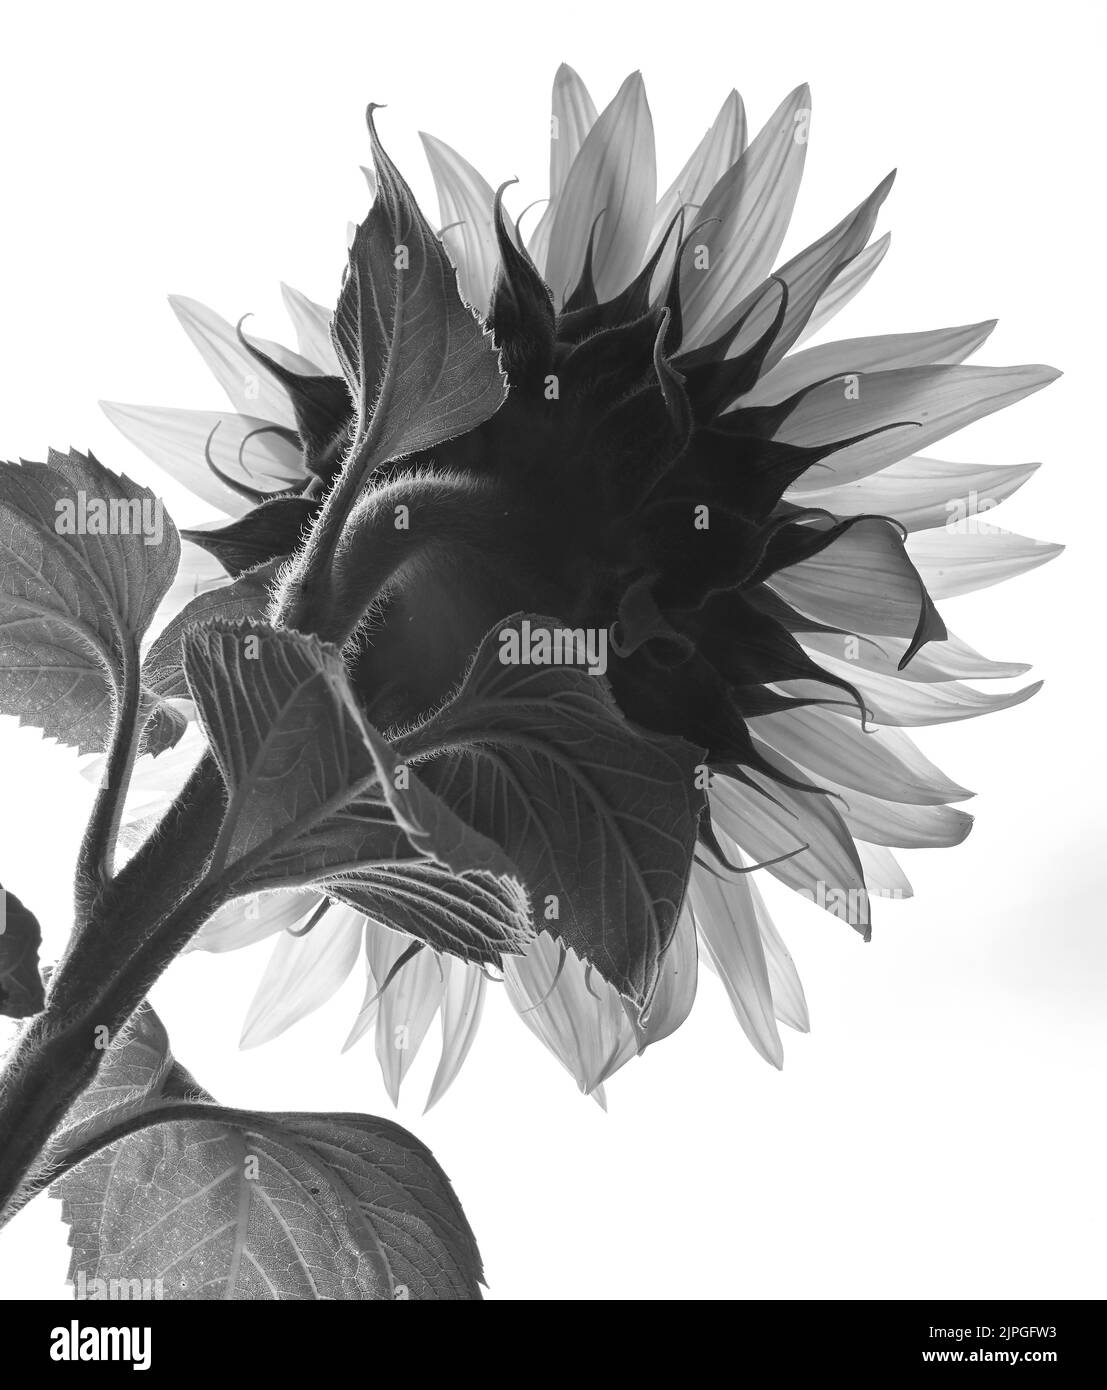 Black and White Details of Sunflower in Studio Stock Photo